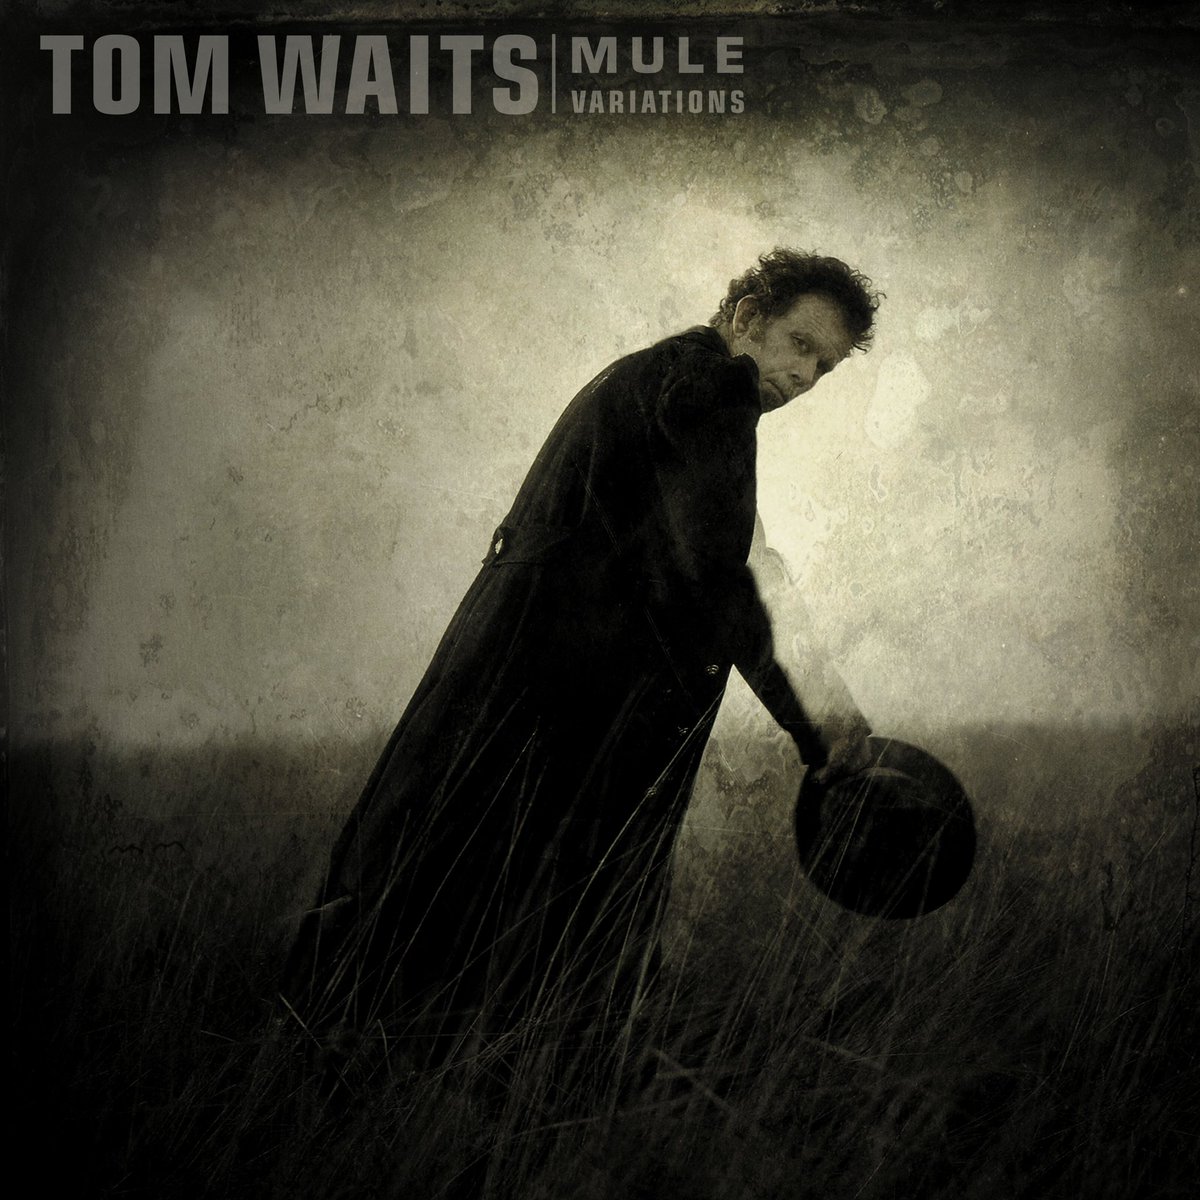 Tom Waits' 'Mule Variations' is 25 years old today. ➡️ bit.ly/3vY29W3 Read @andrewspiesss’ “All Things Reconsidered” essay about Waits’ 13th studio album.